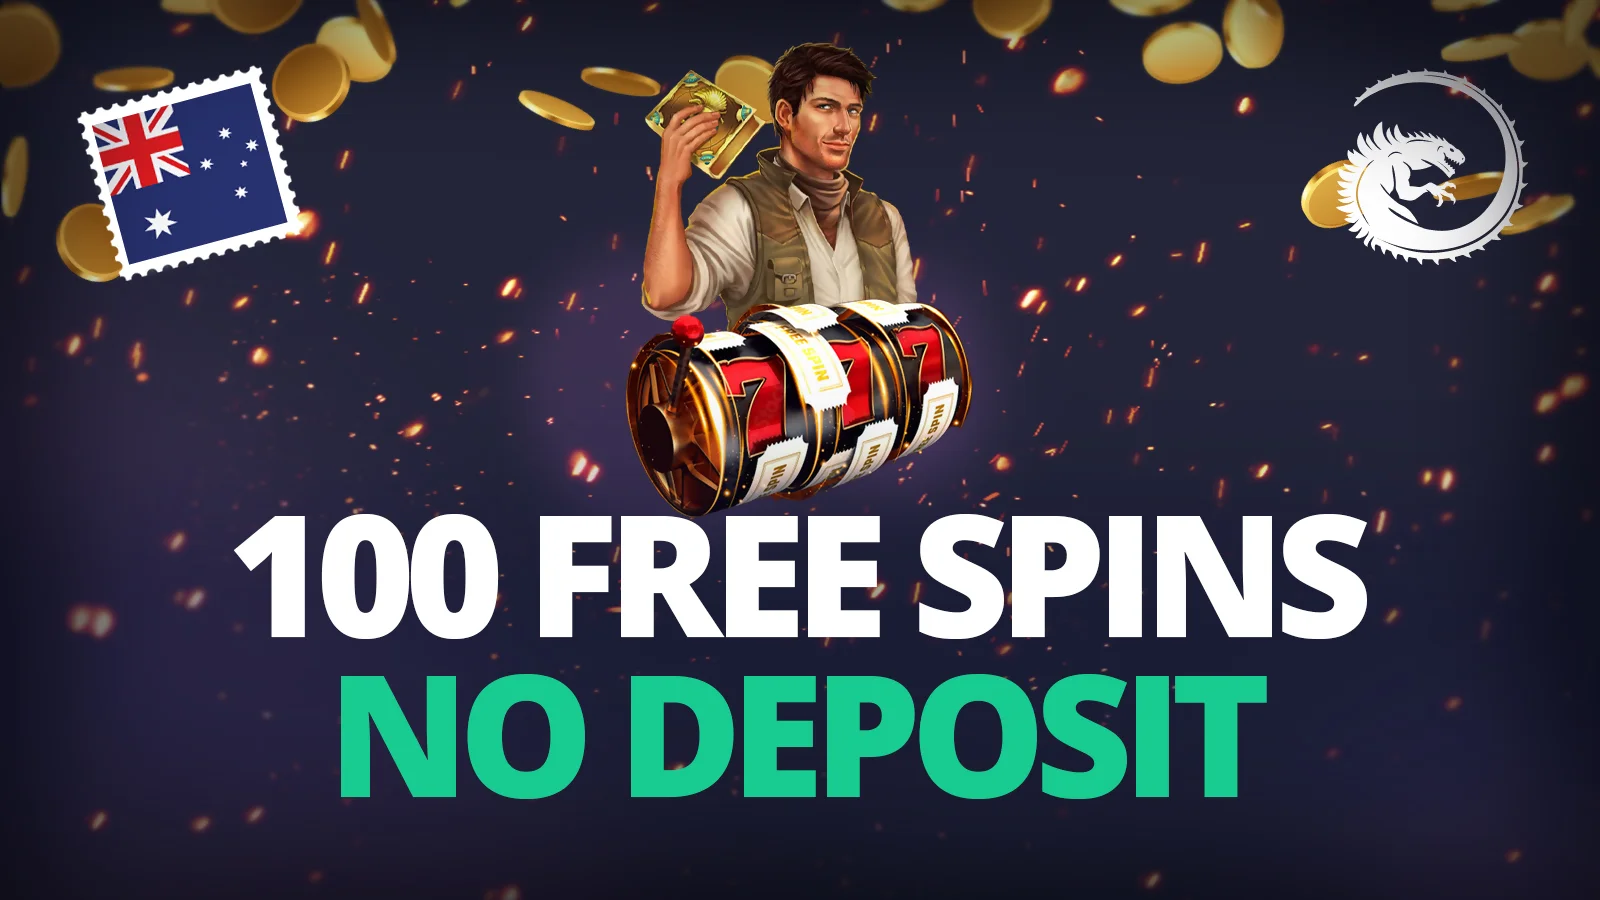 Free Spins Casino Bonuses & Promos: Claim 100+ Free Spins for Real Money, Best Daily